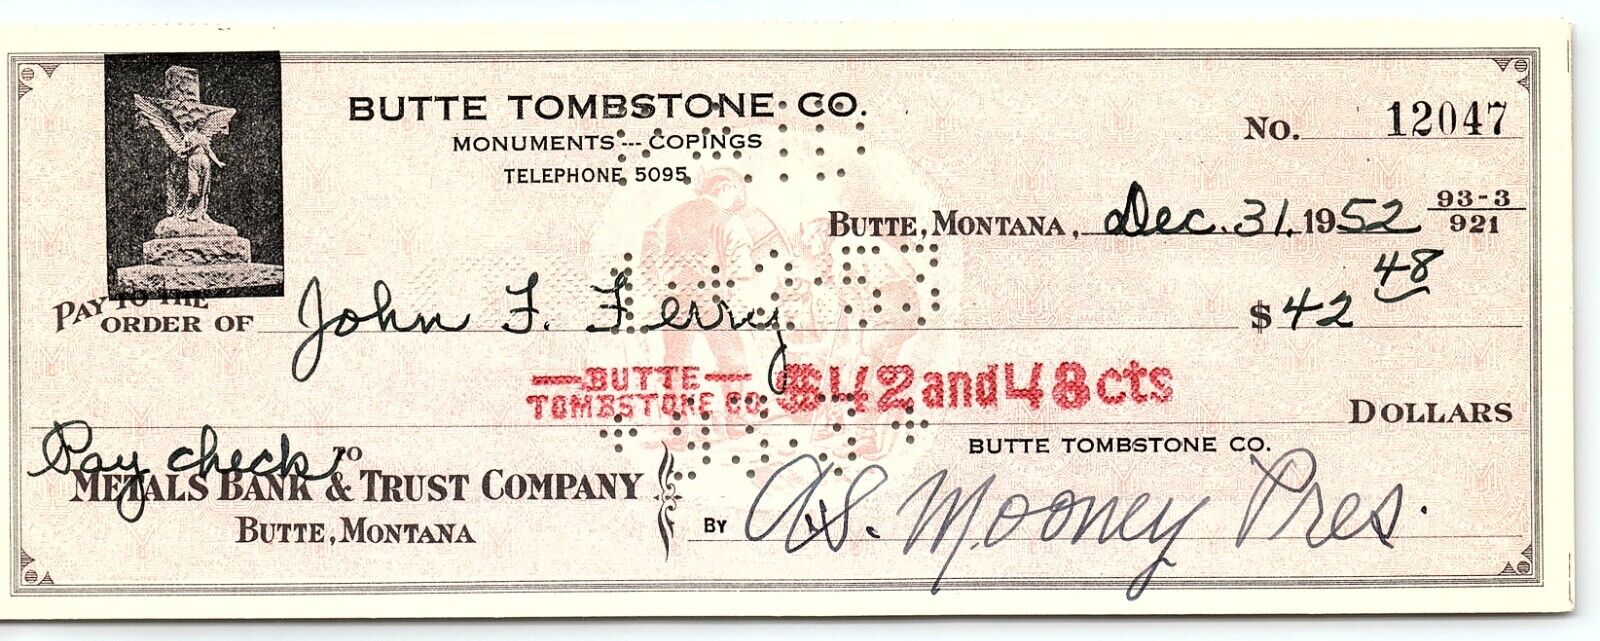 1952 BUTTE MONTANA BUTTE TOMBSTONE CO METALS BANK & TRUST COMPANY CHECK Z1649